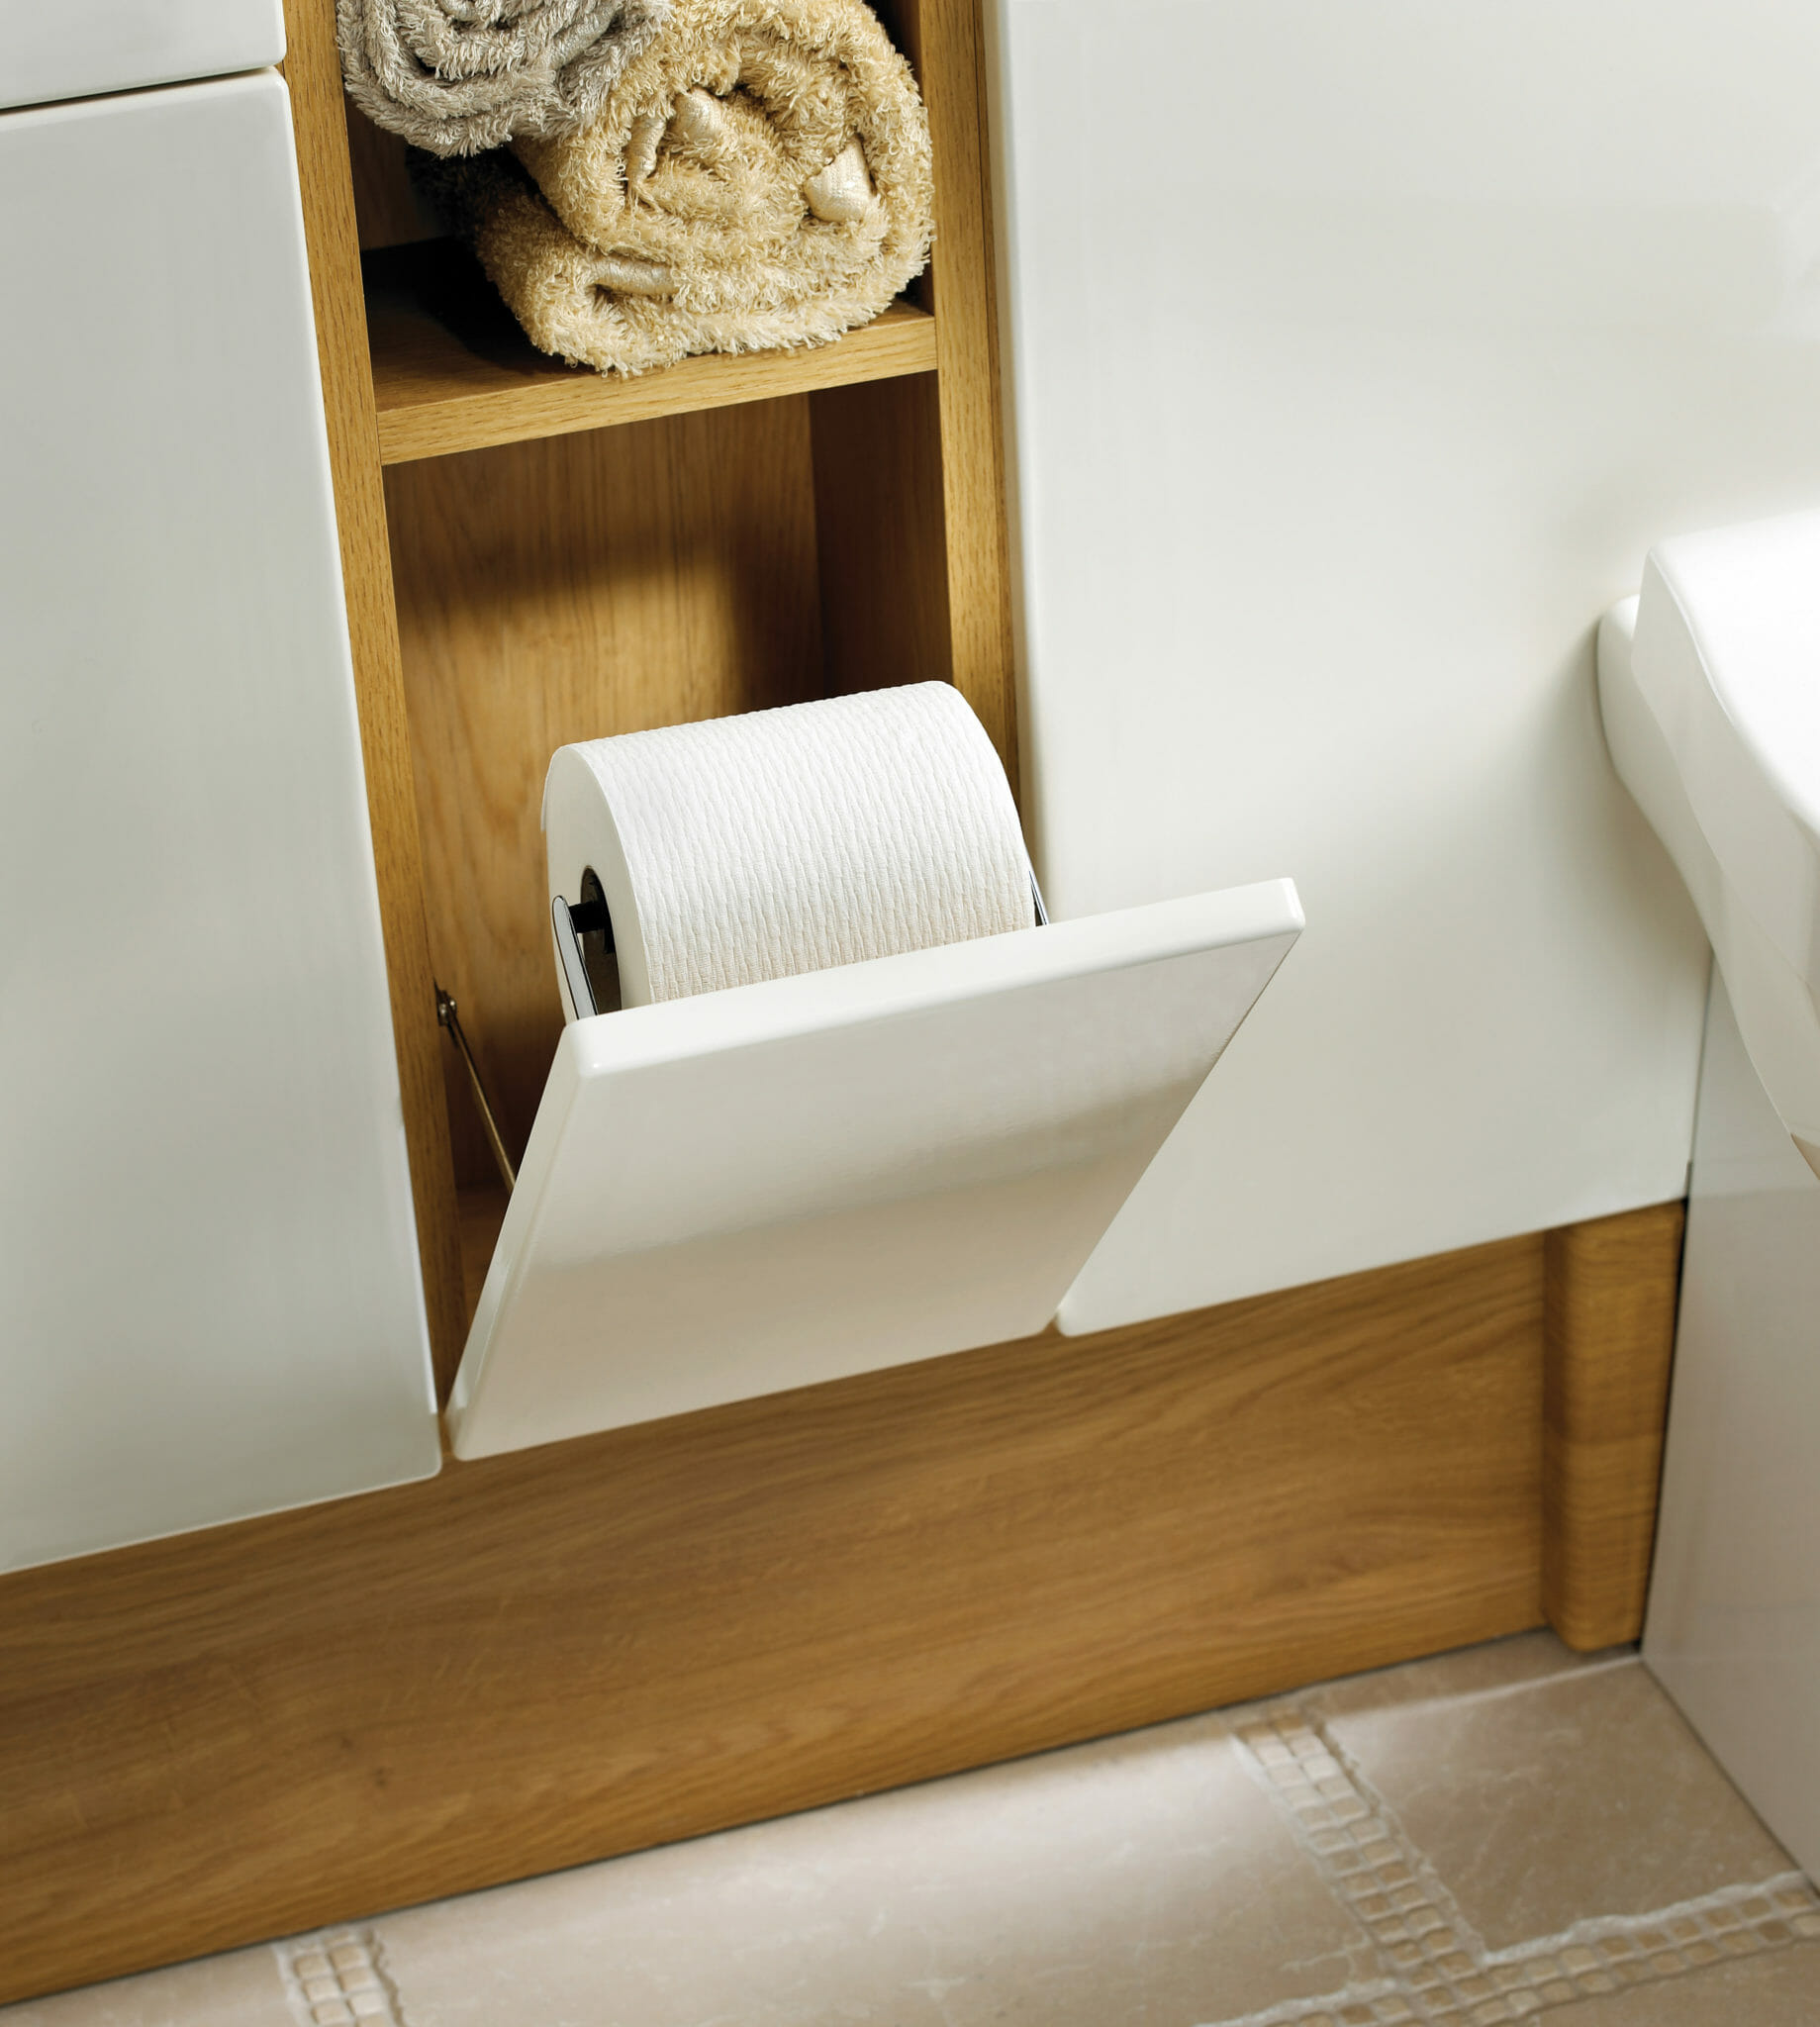 Fitted Bathroom Furniture from the Major Leading High Quality Brands